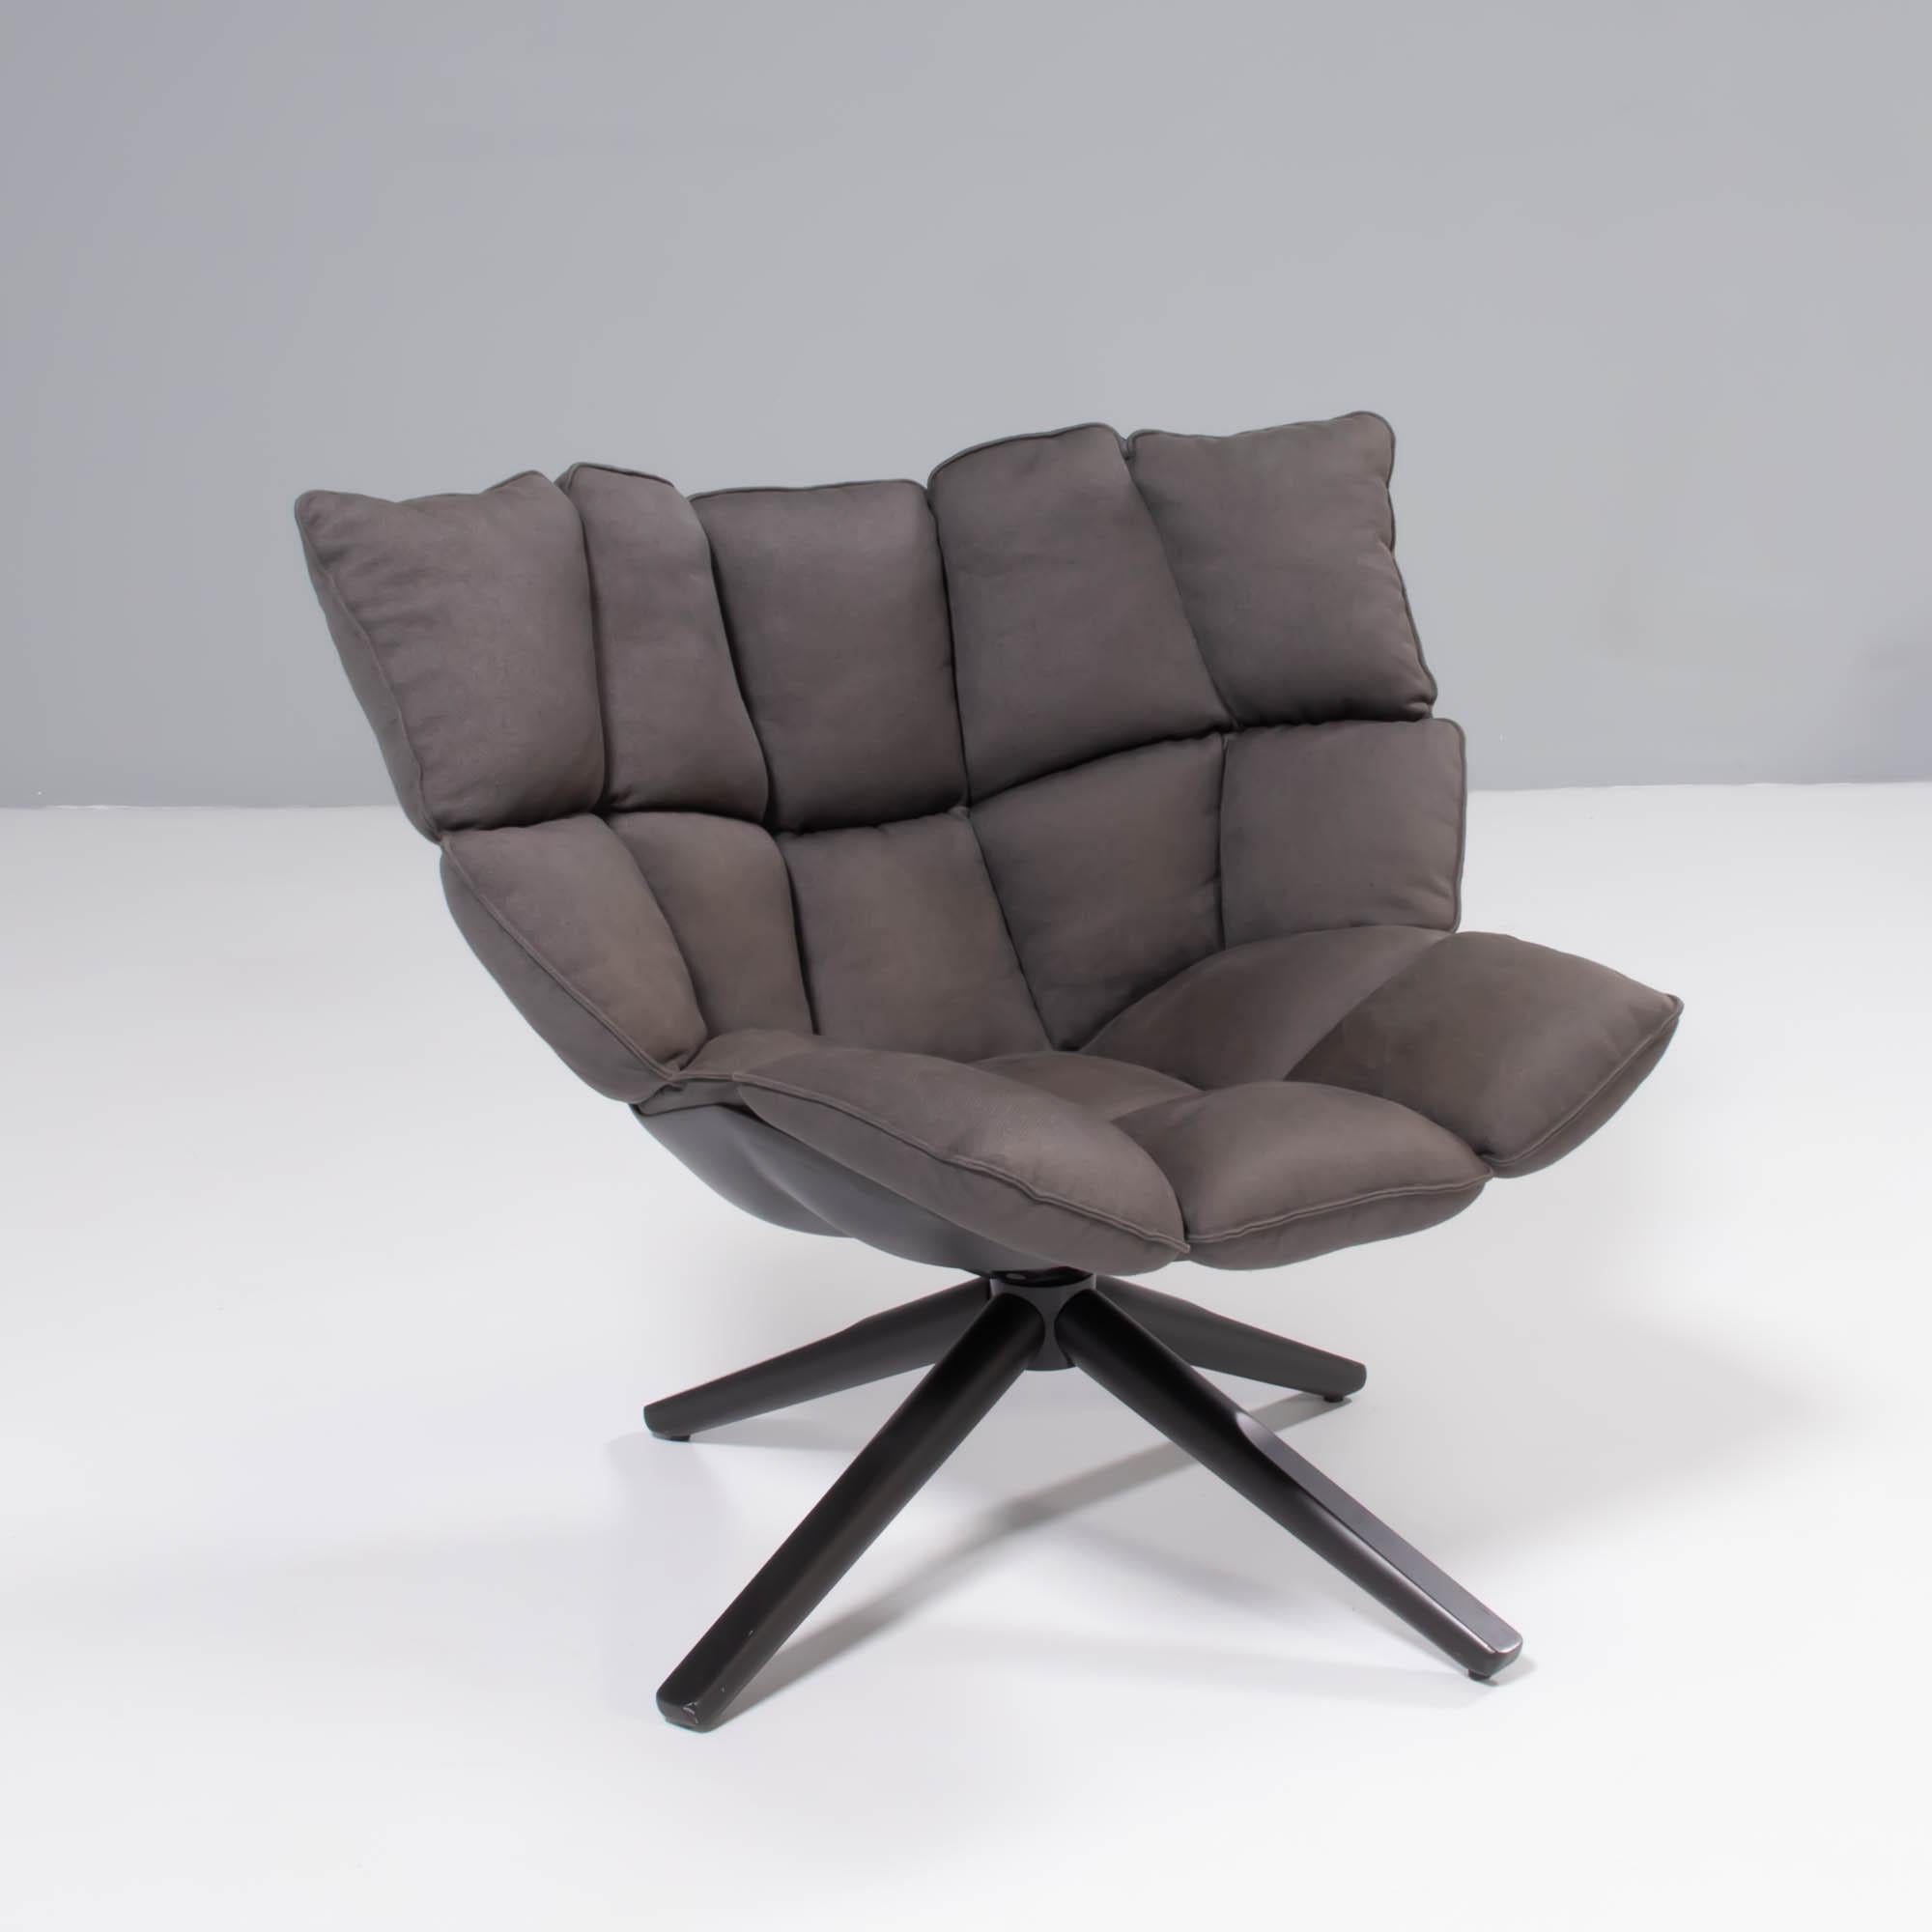 Designed by Patricia Urquiloa for B&B Italia in 2011, the Husk chair is an iconic modern design.

Combining a hard shell with soft quilted cushioning, the Husk chair is the perfect balance between comfort and eco-sustainability. 

The black outer